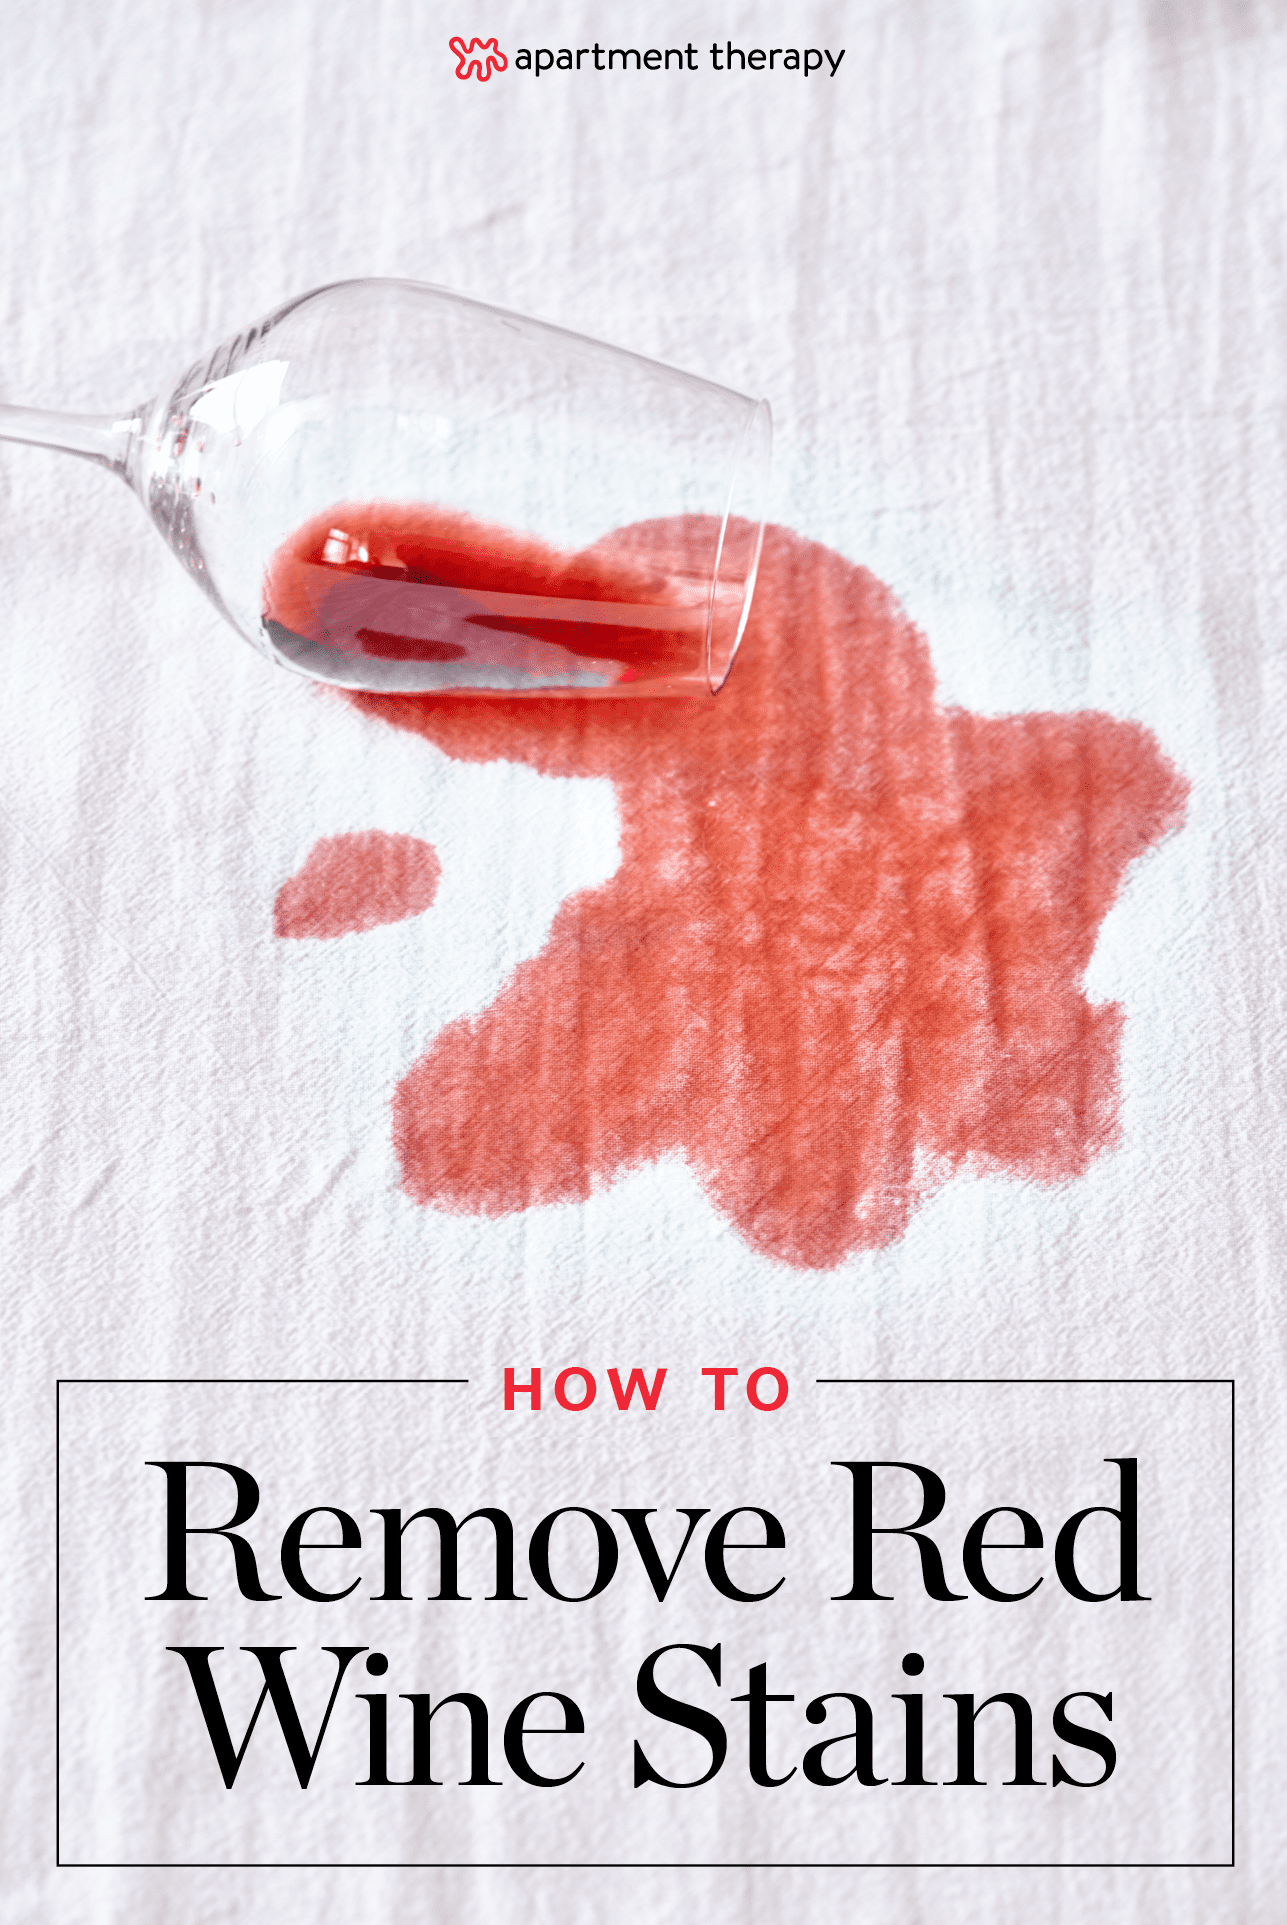 Støvet udstrømning Arena How To Get Rid of Red Wine Stains | Apartment Therapy